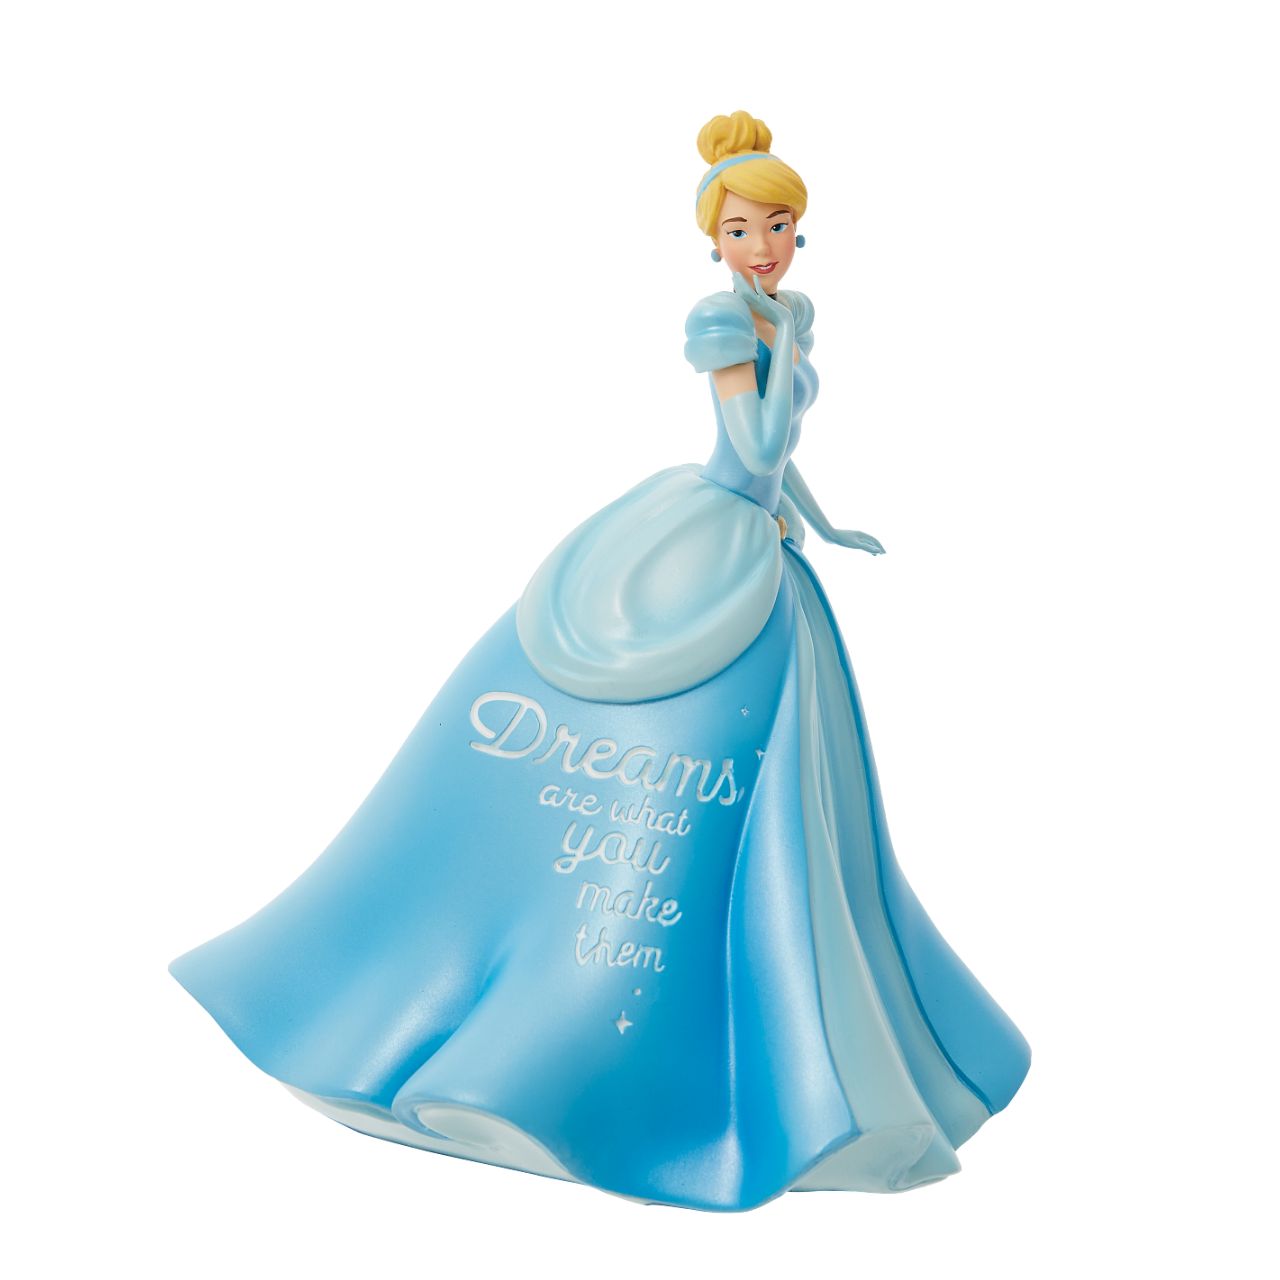 Disney Cinderella Princess Expression Figurine  Cinderella Princess Expression Figurine. Each piece is hand painted and slight colour variations are to be expected which makes each piece unique. Supplied in branded gift box. Not a toy or children's product. Intended for adults only.